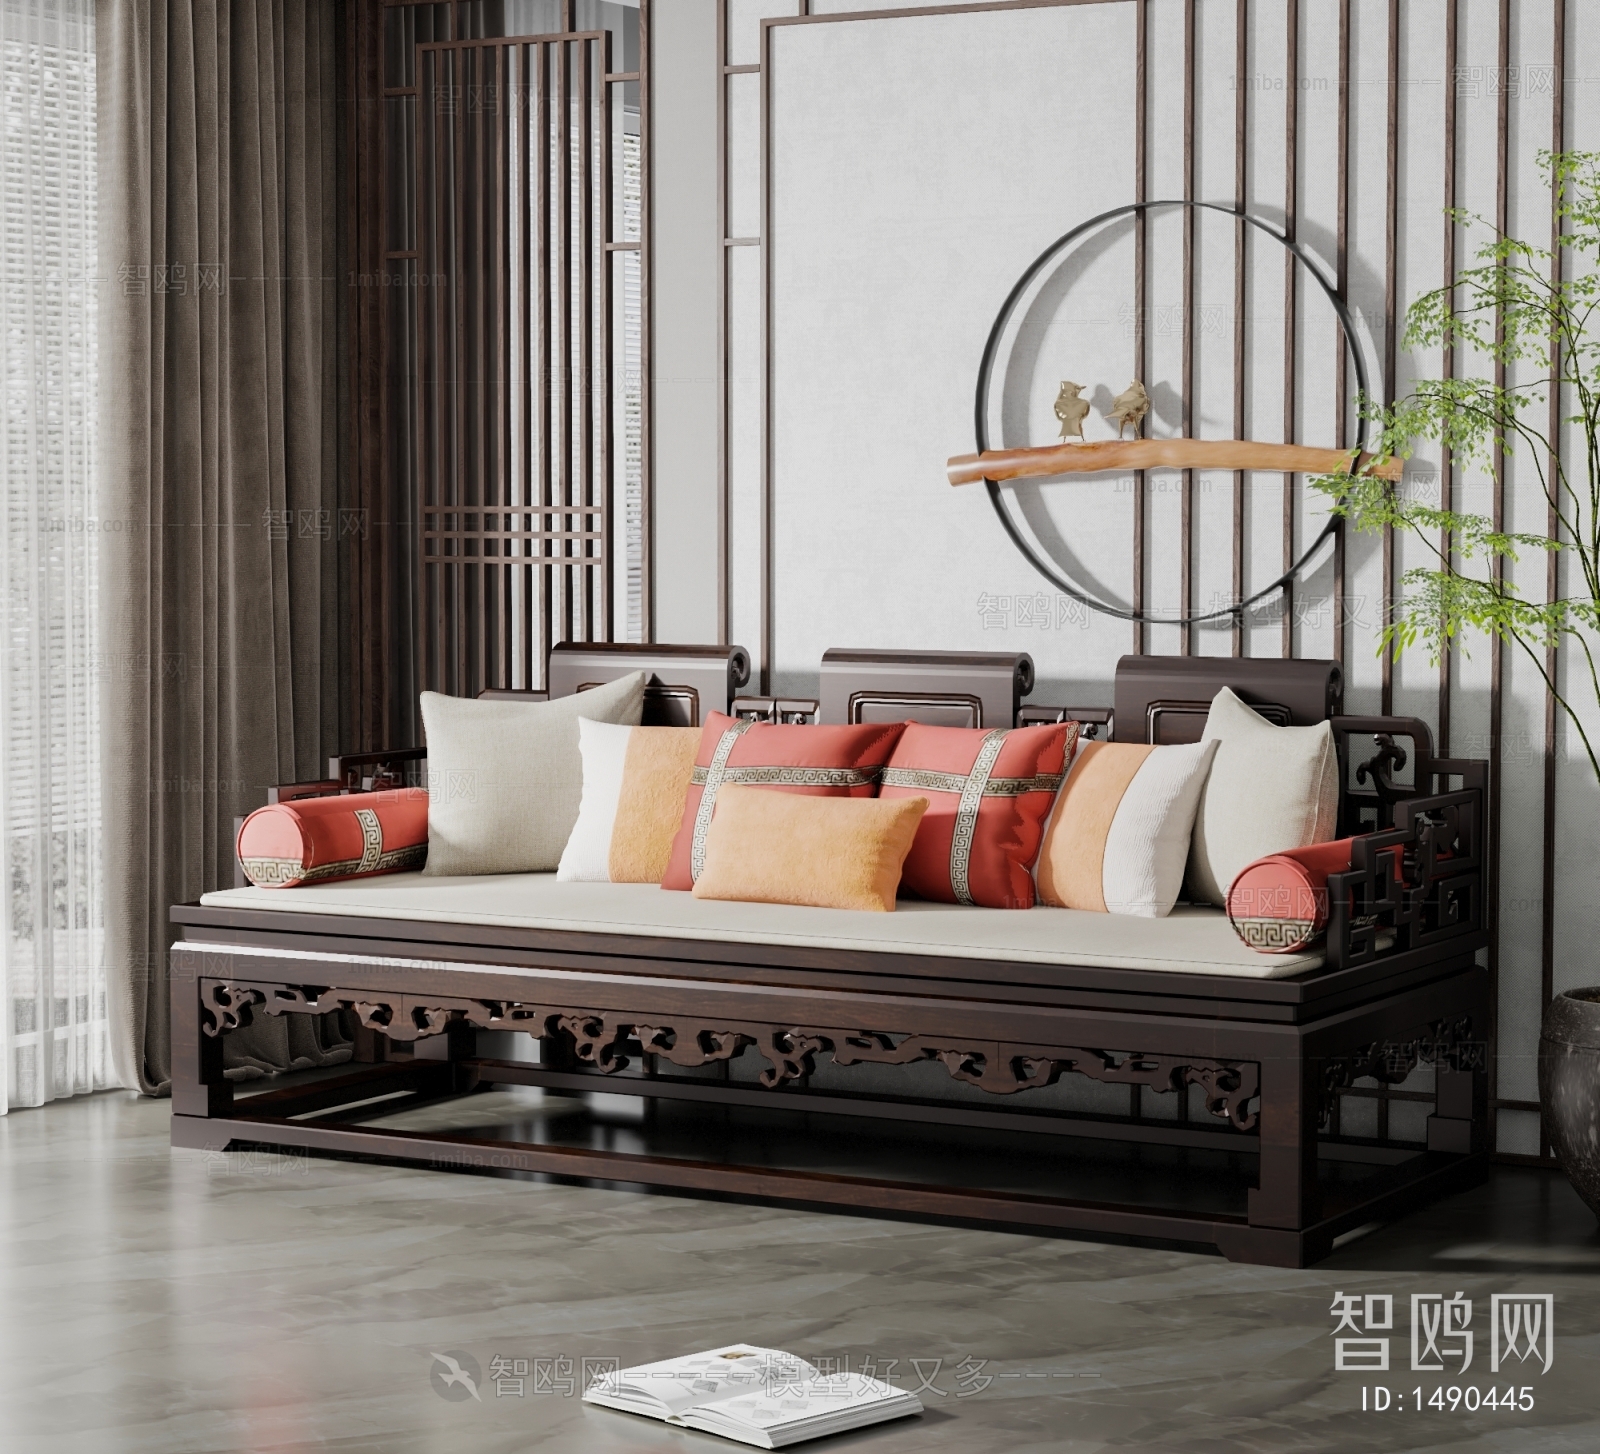 Chinese Style A Sofa For Two